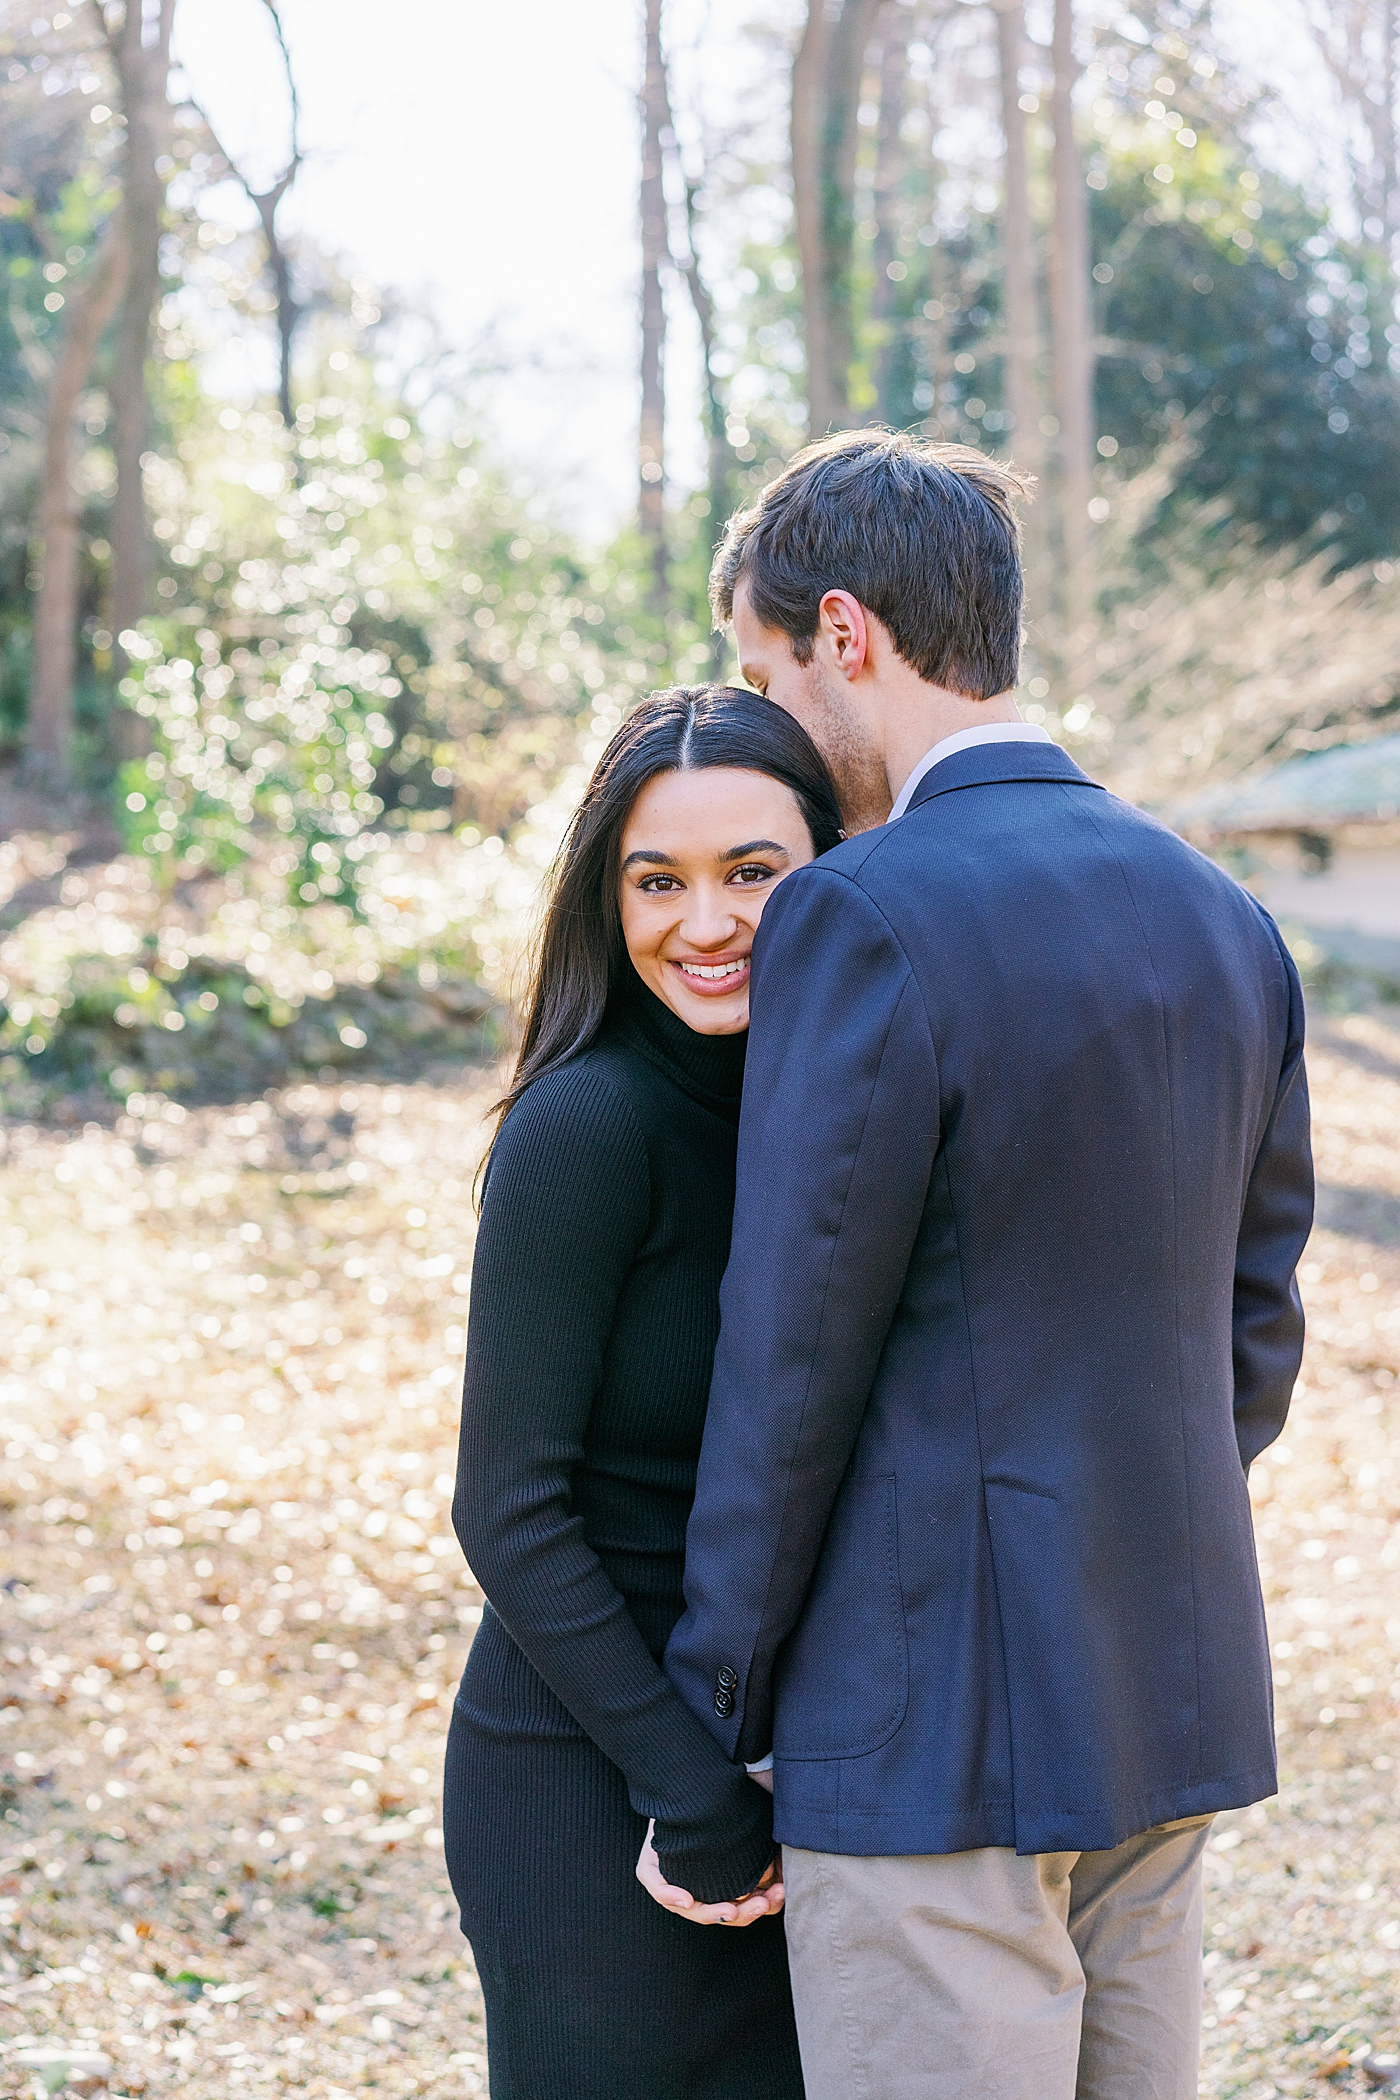 Bride to be in black dress hugging her fiance | Image by Annie Laura Photo